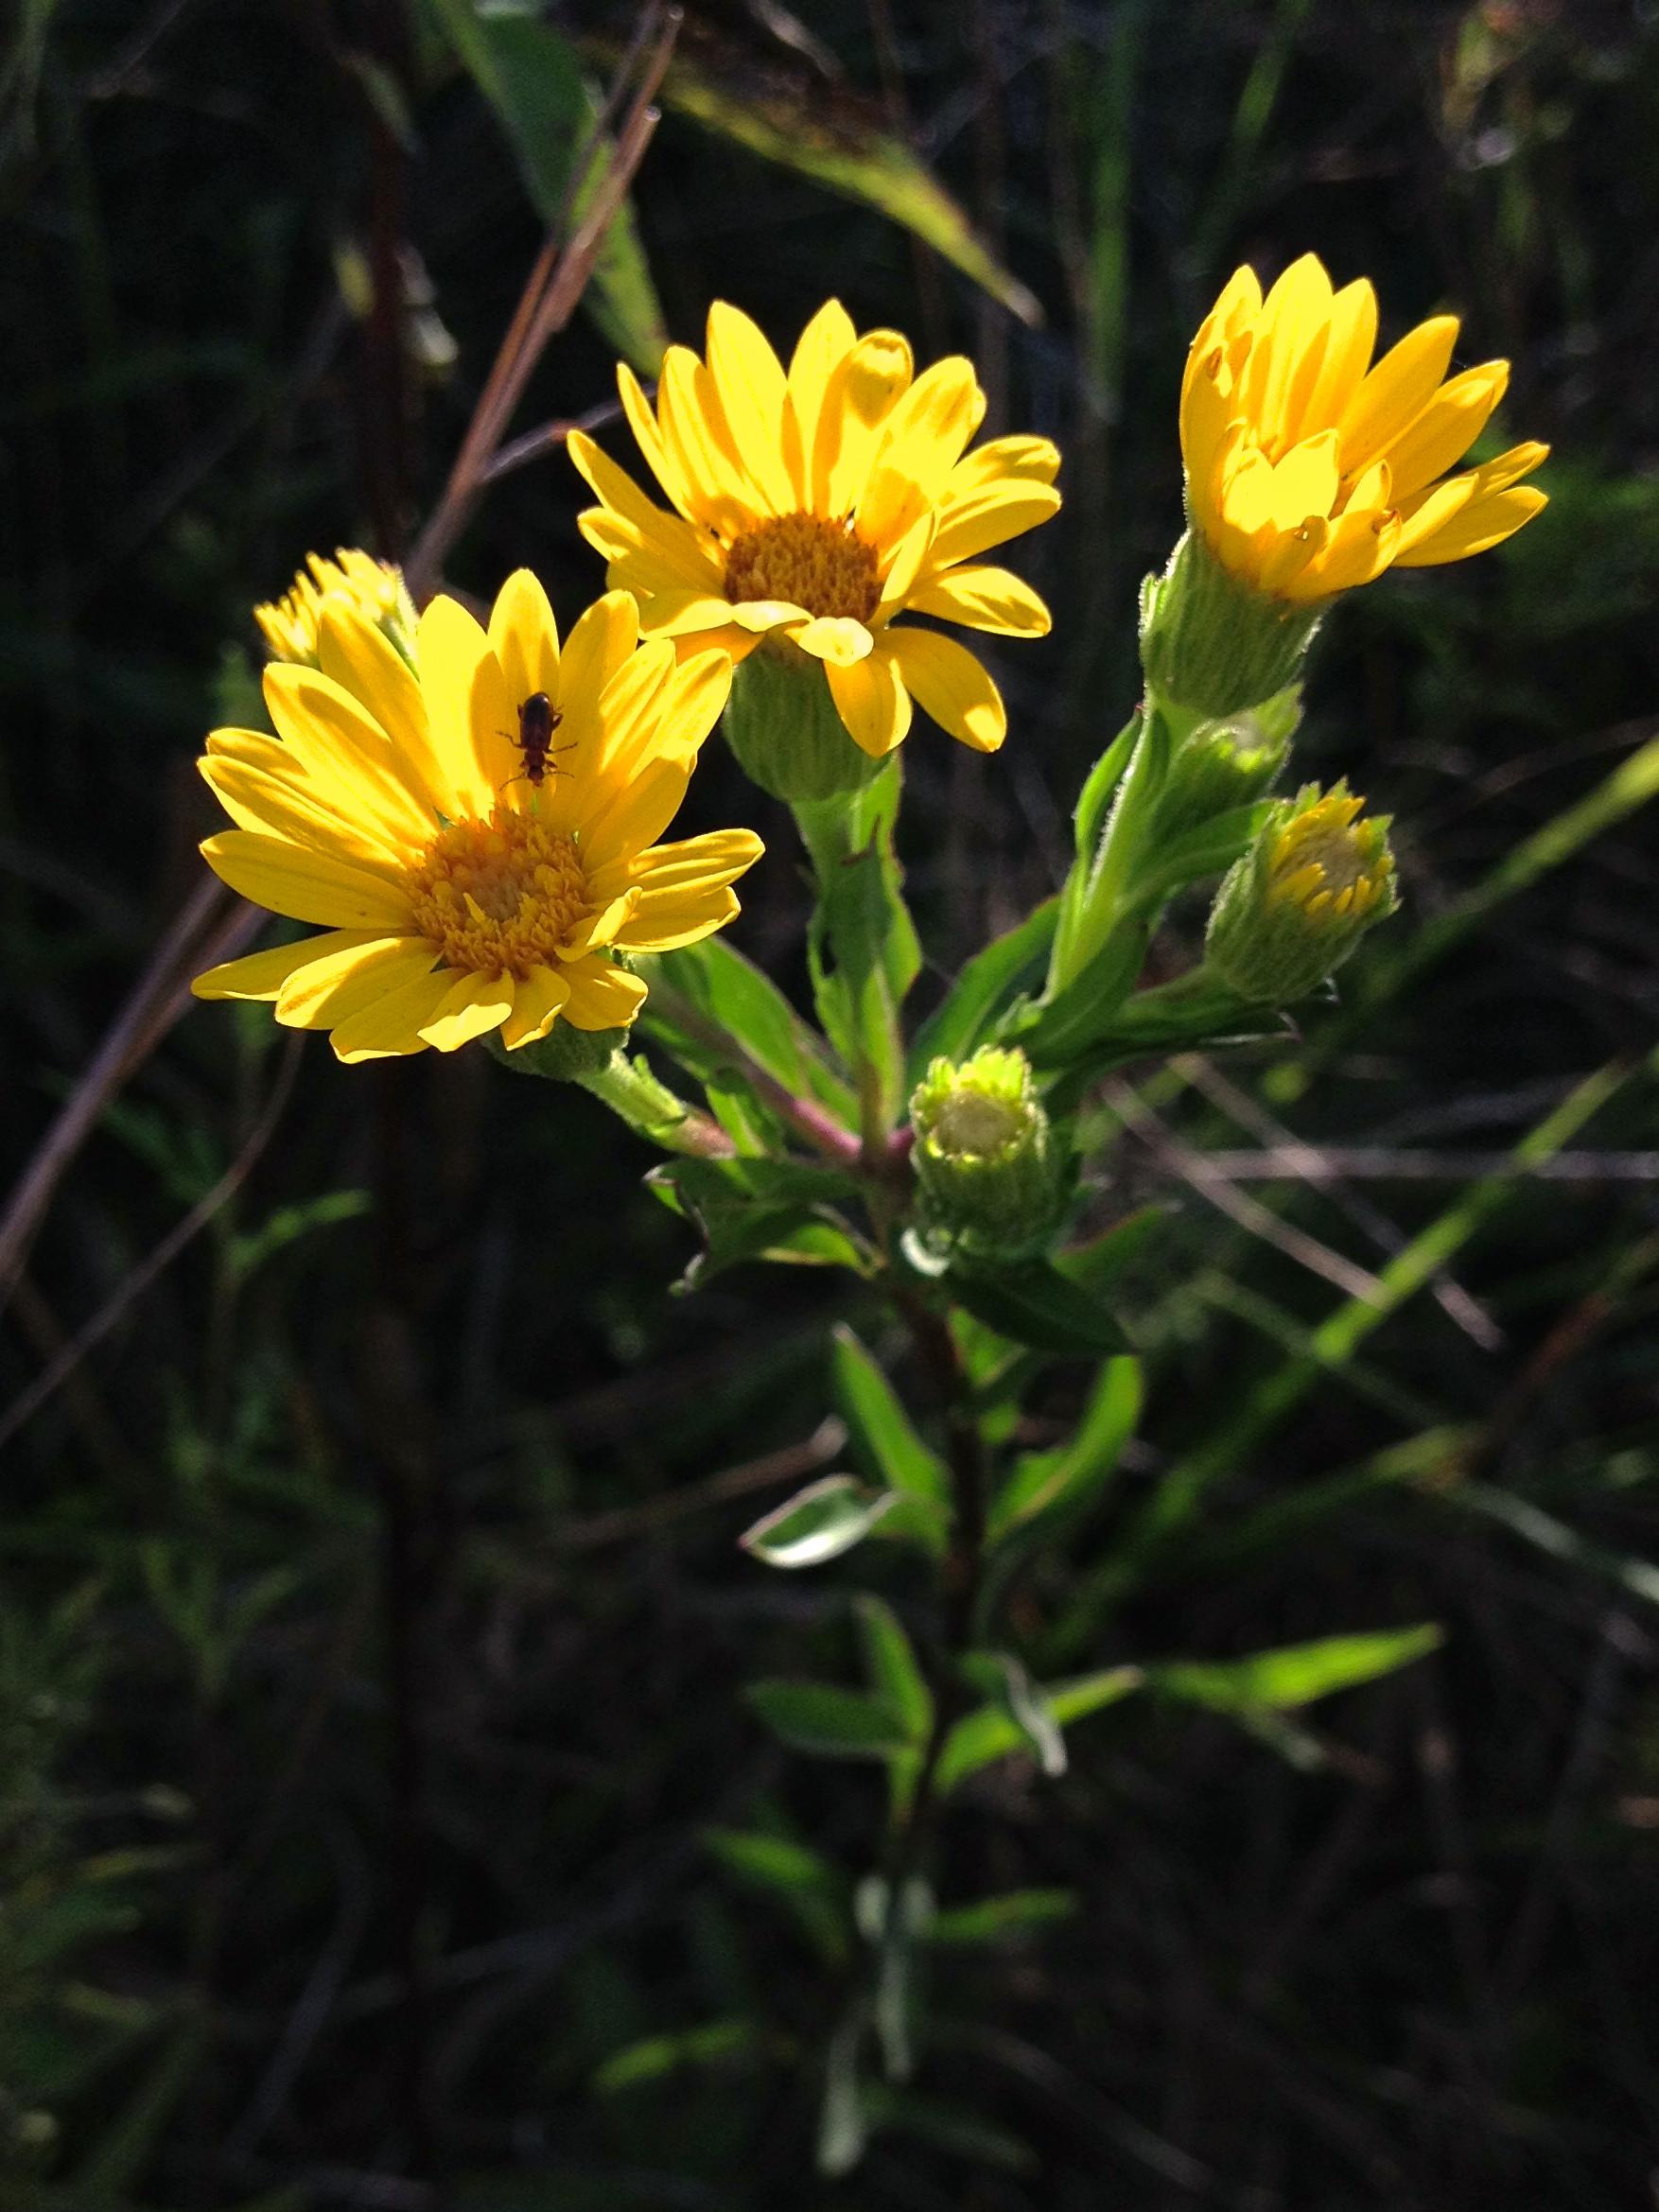 Yellow flowers with green sepals and leaves, yellow-green buds and maroon-green stems.